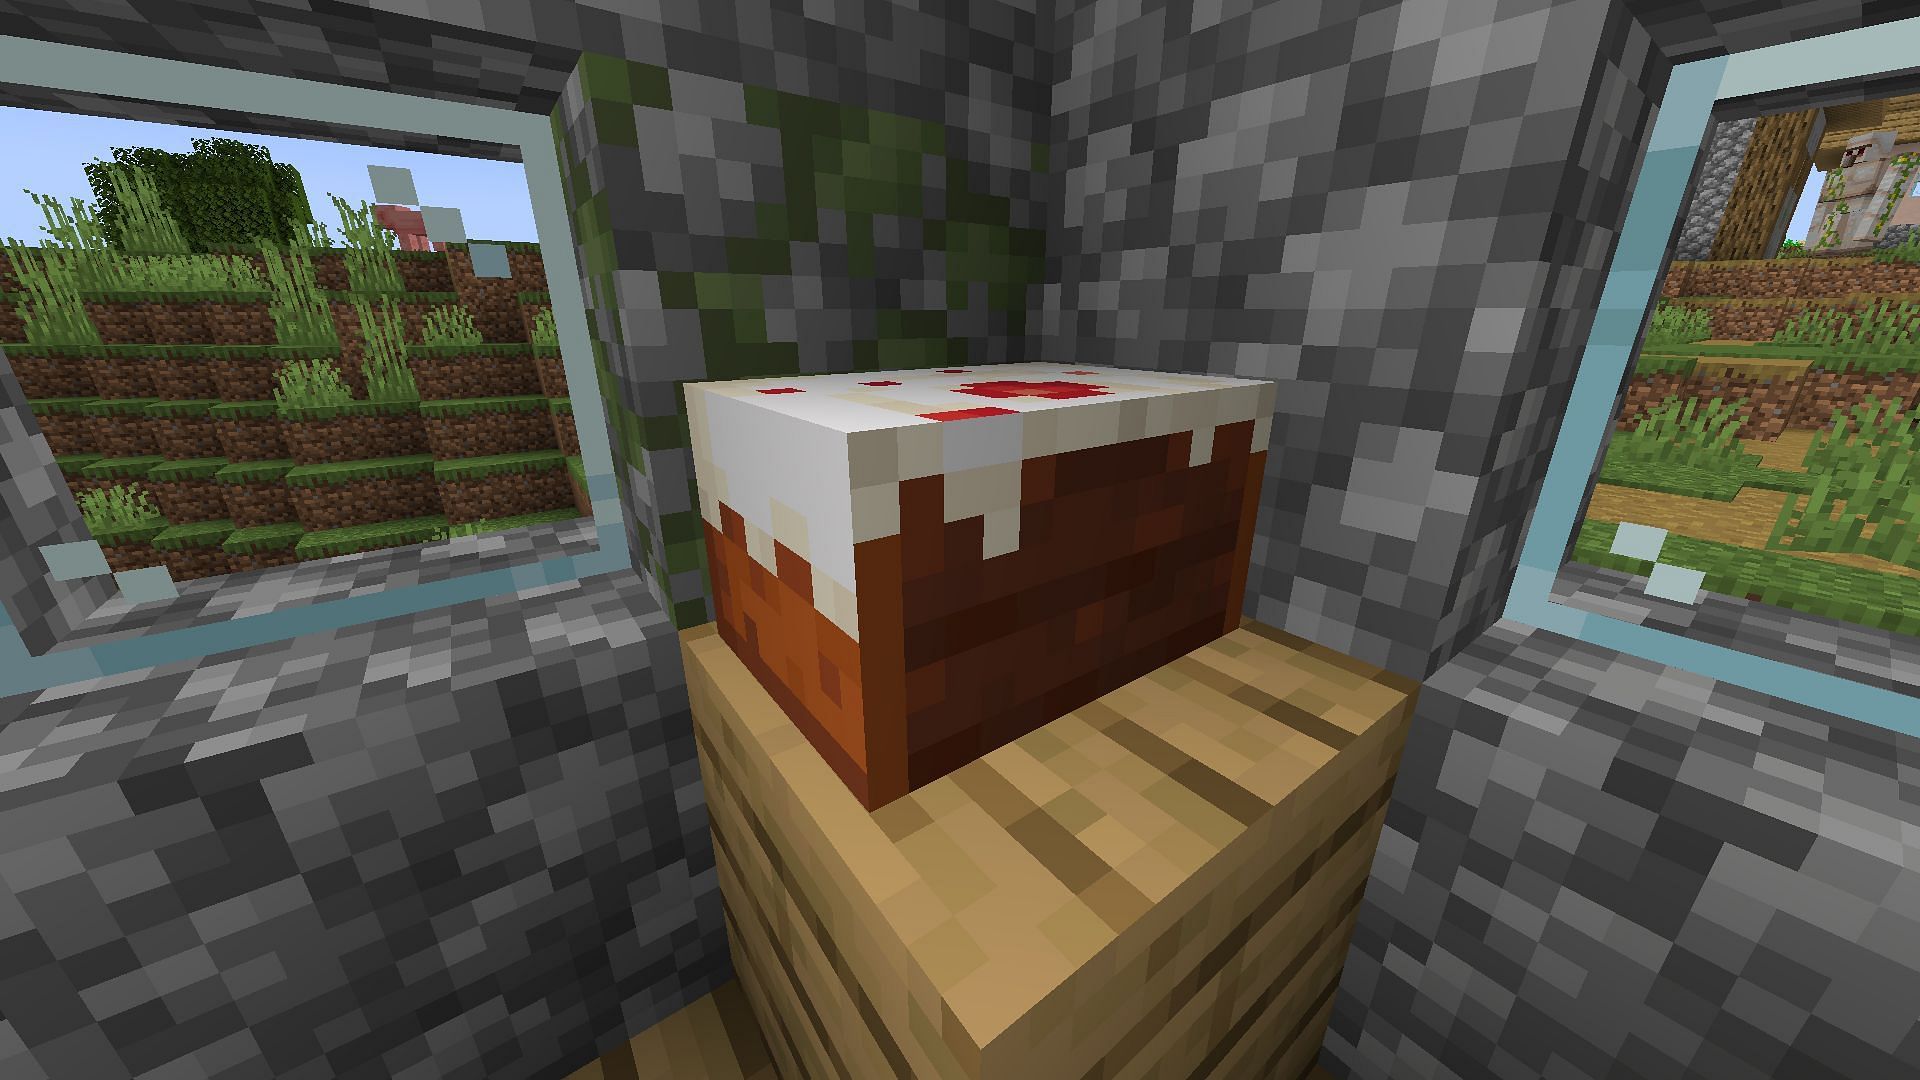 Cakes can be placed as blocks and several players can eat from seven cake slices (Image via Minecraft 1.19 update)